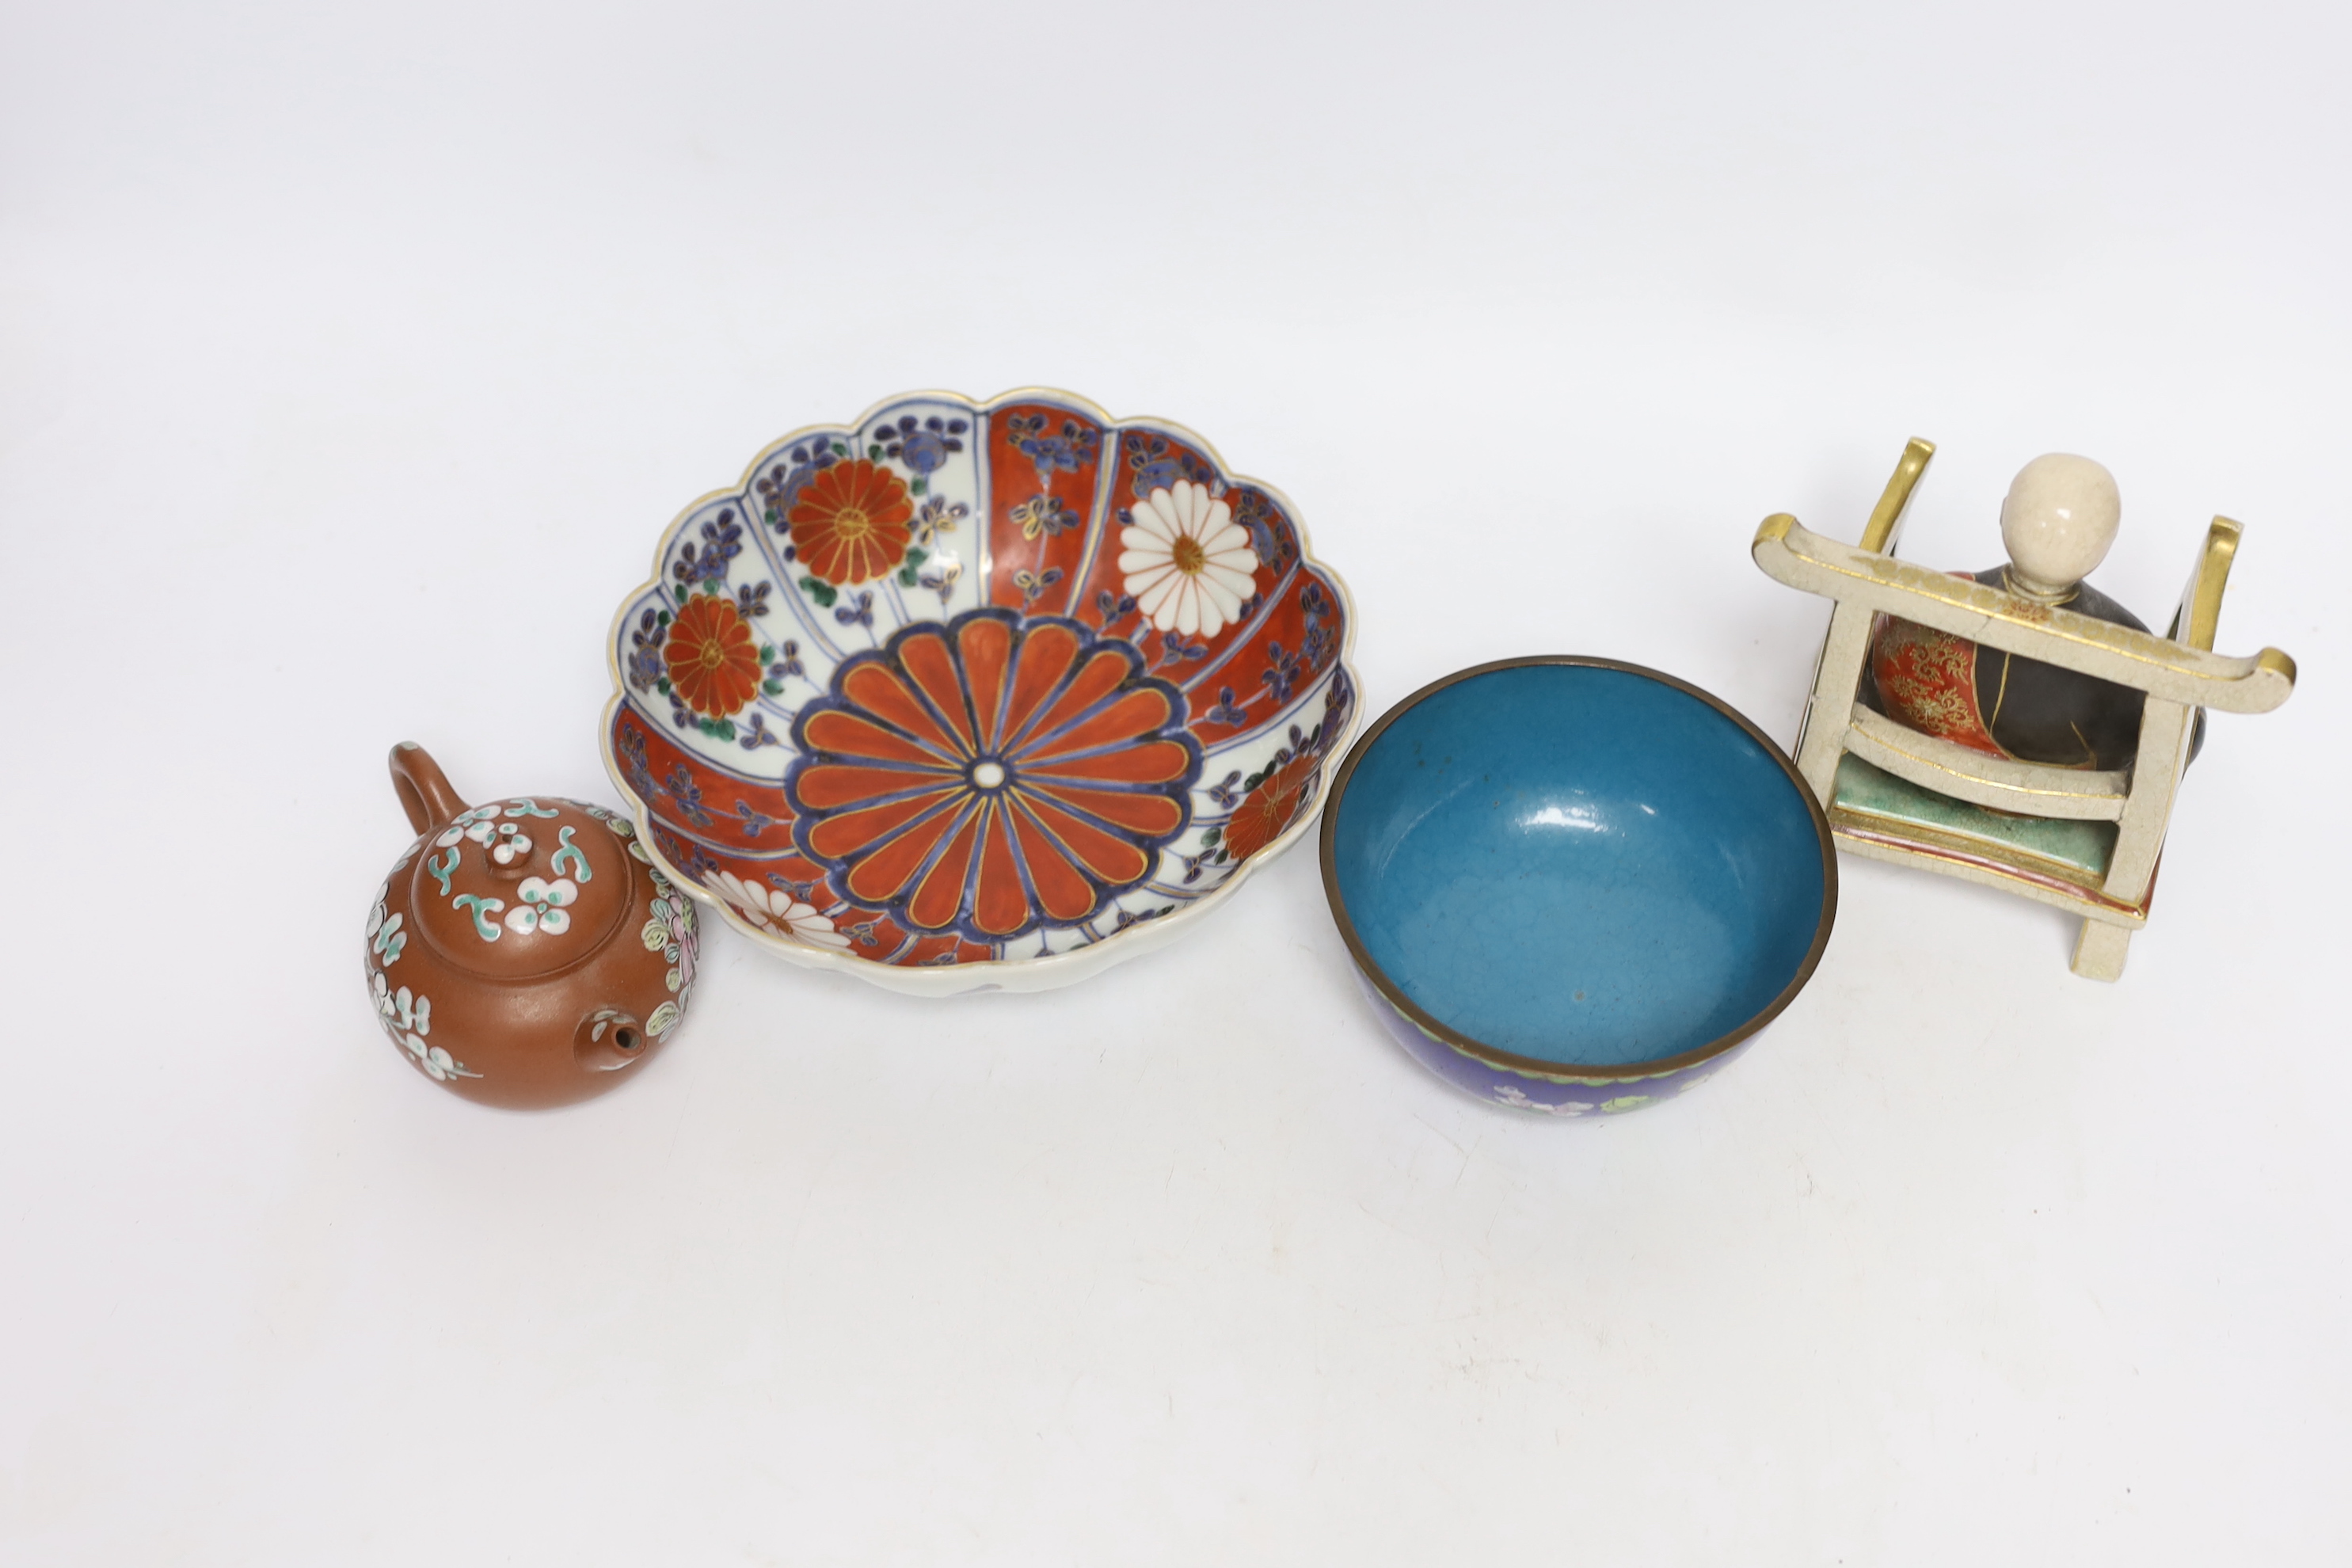 A Chinese enamelled yixing teapot and cloisonné bowl together with a Japanese Imari bowl and a Satsuma seated figure of a Buddhist monk, tallest 14cm